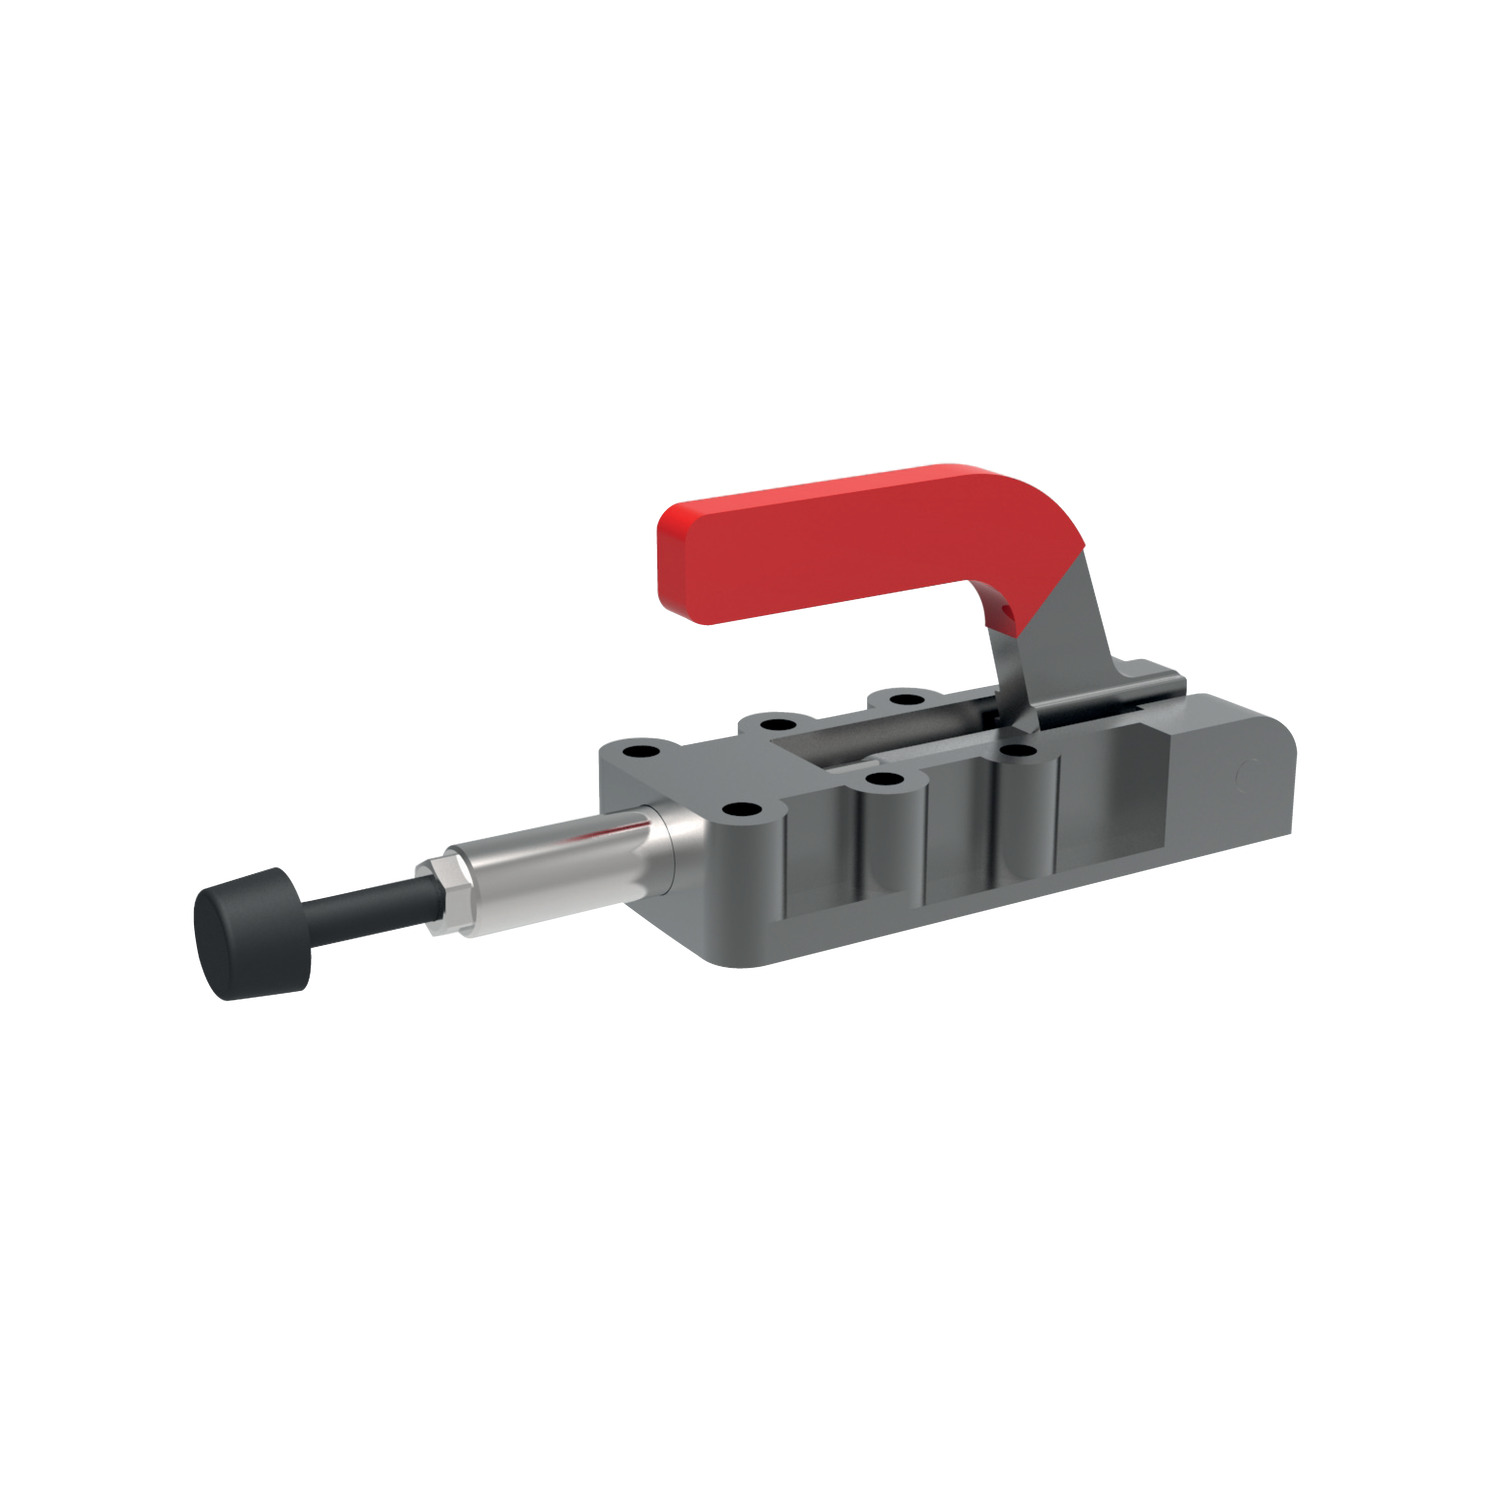 Product 42150, Heavy Duty Push-Pull Toggle Clamp solid hand lever / 